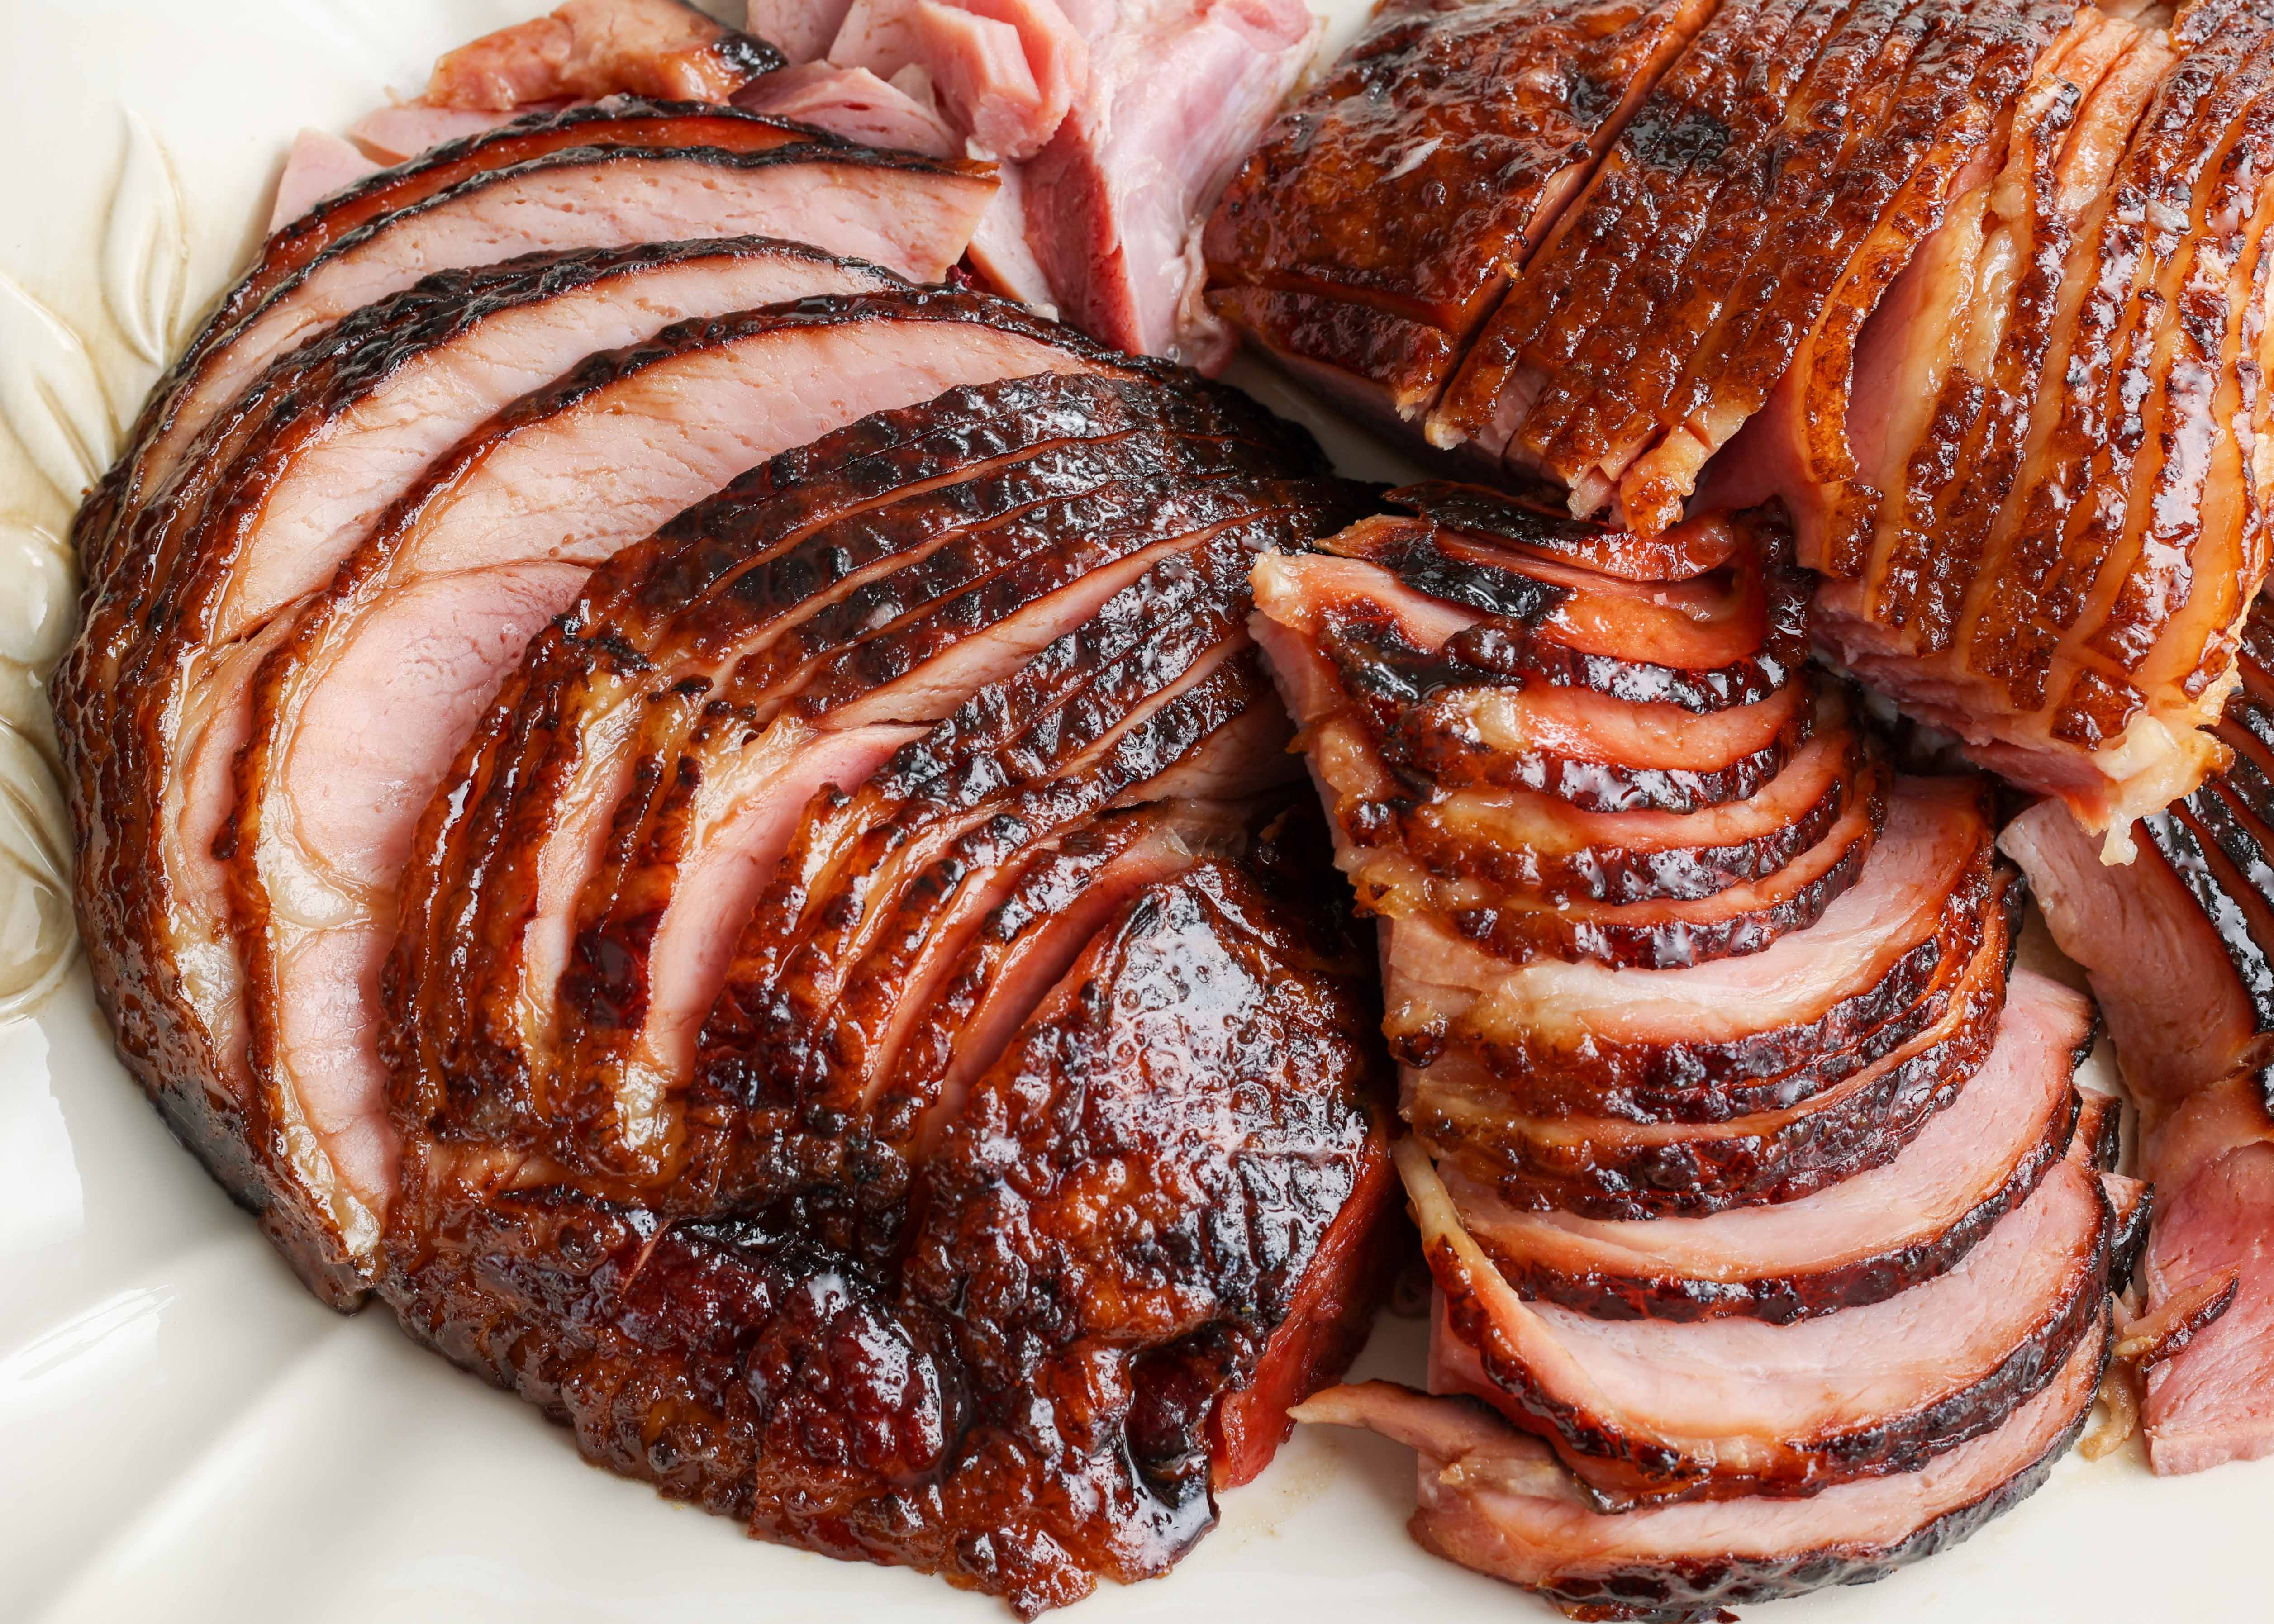 How to Cook a Ham the Easy Way (Ham Glaze Recipe Included!)